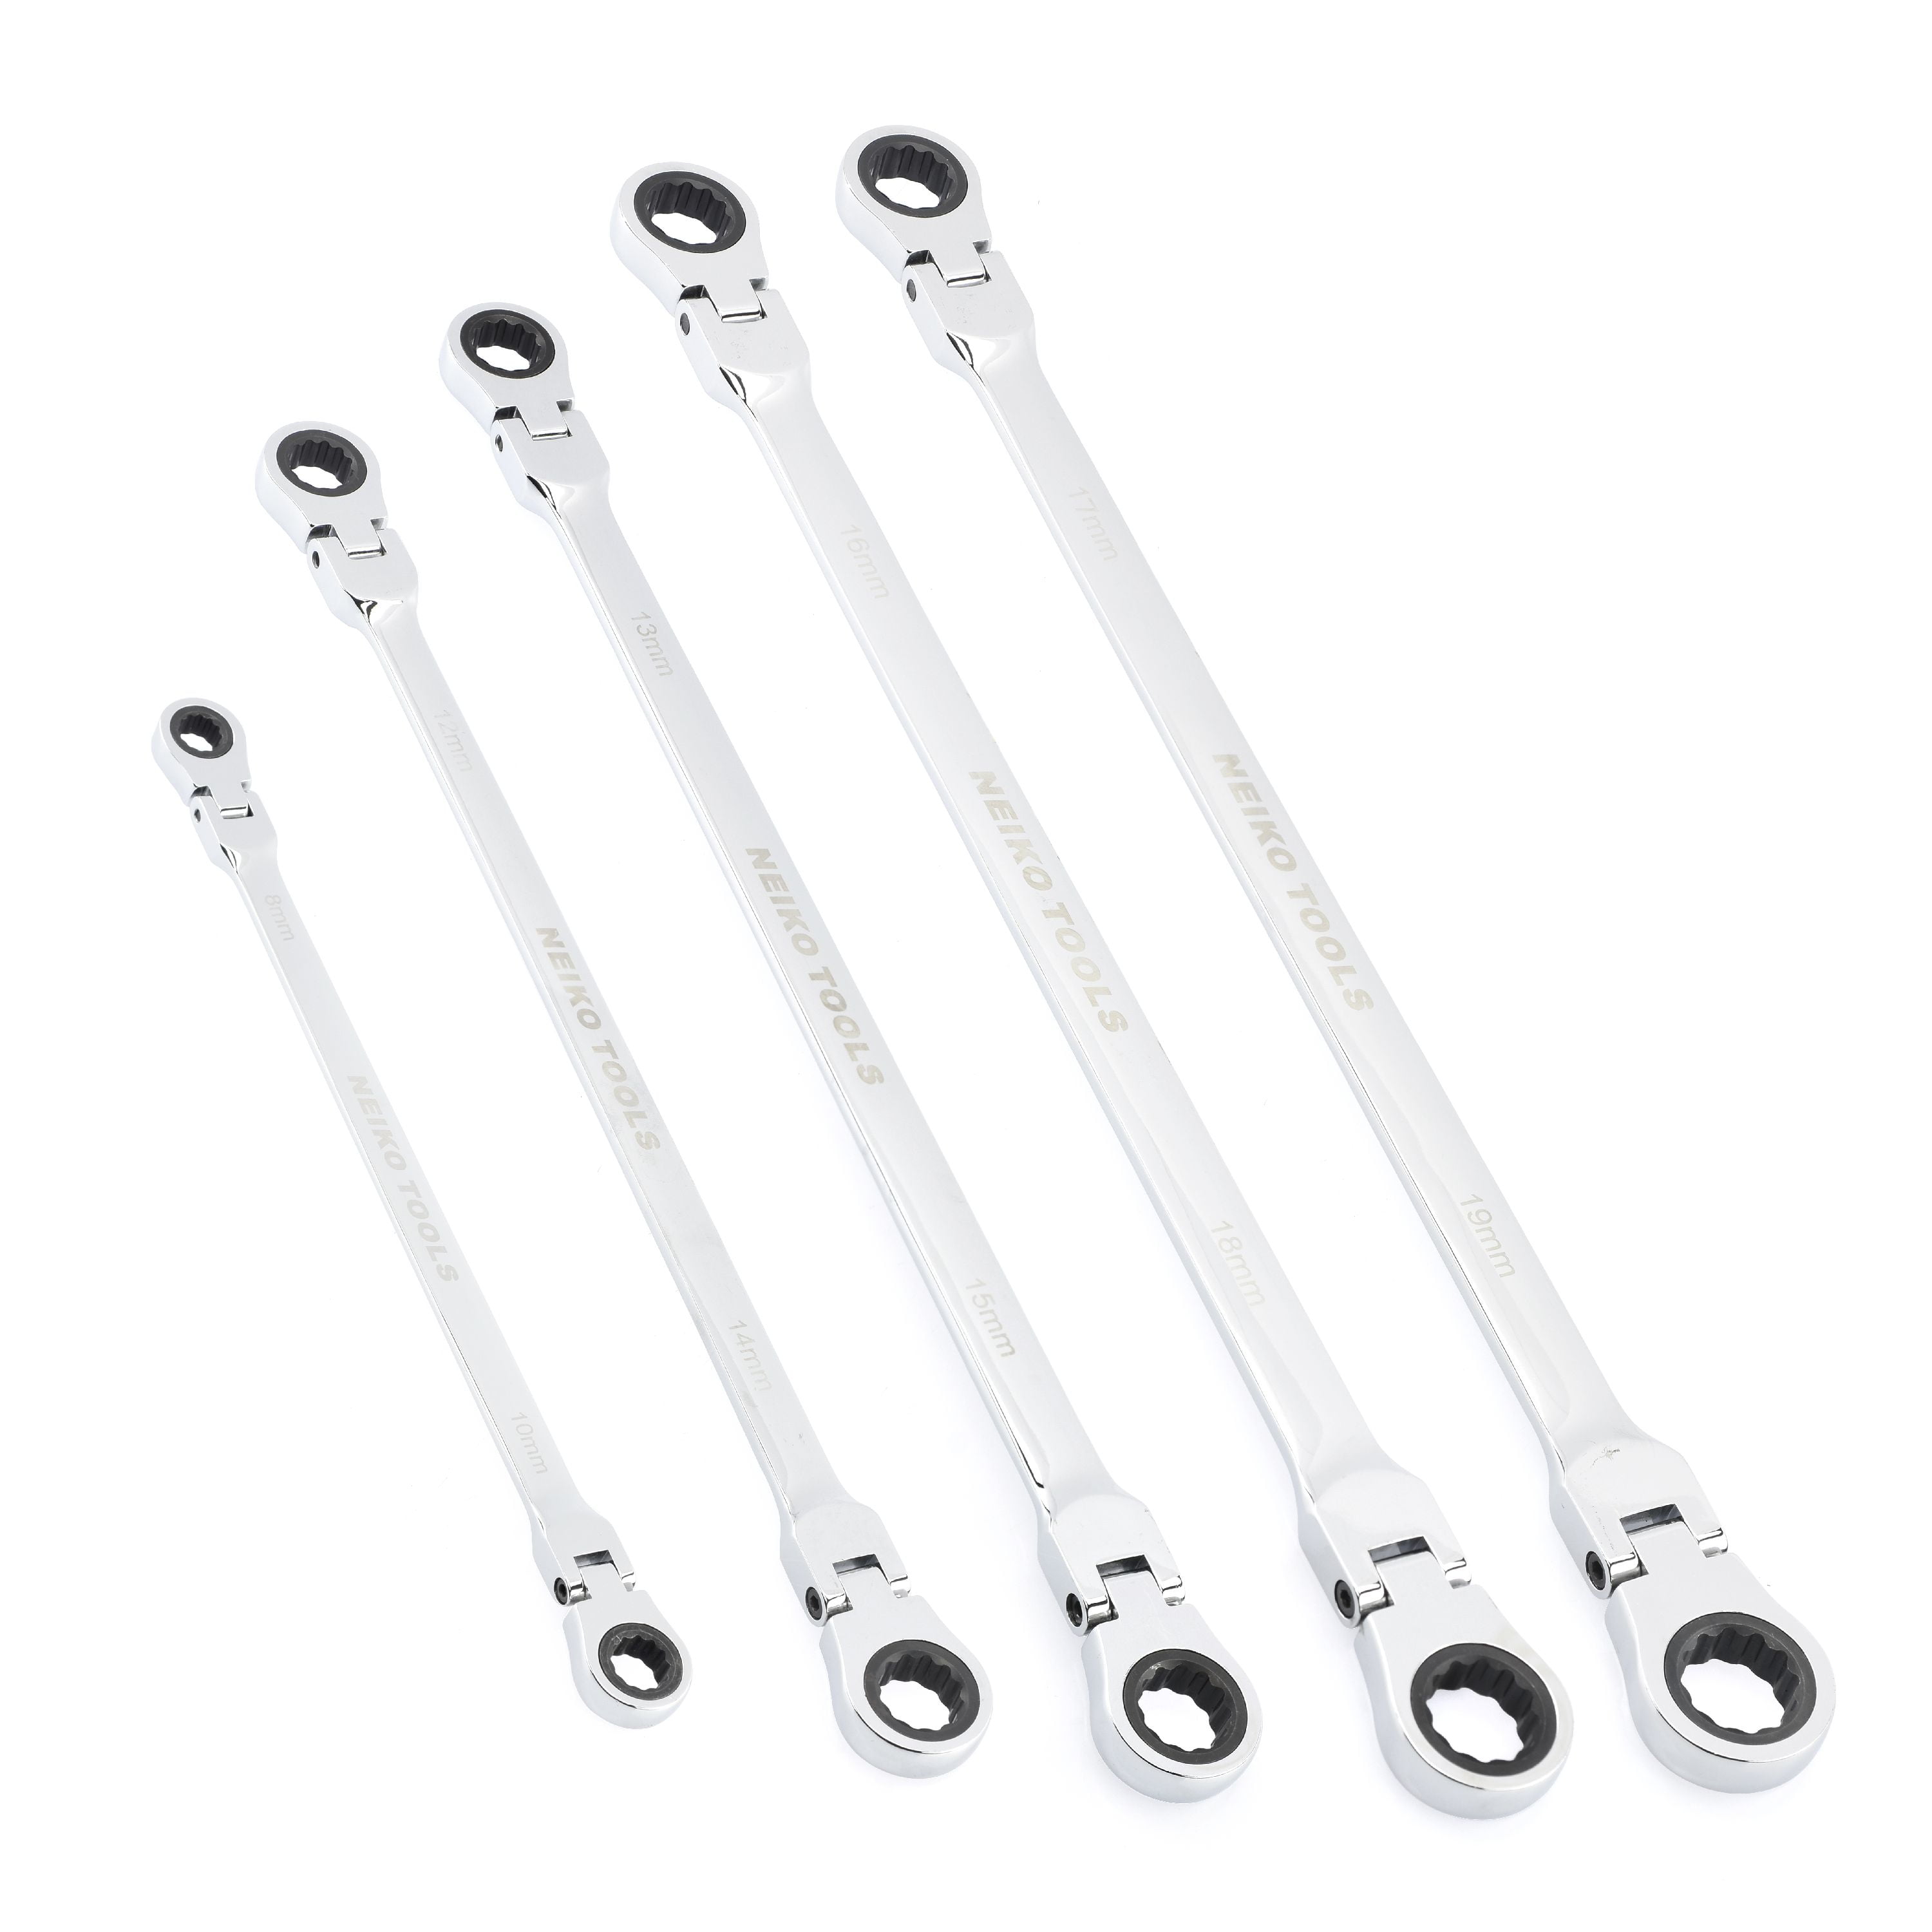 Open Box Items Neiko Combination Wrenches Polished Chrome Metric 8-19mm Sizes 